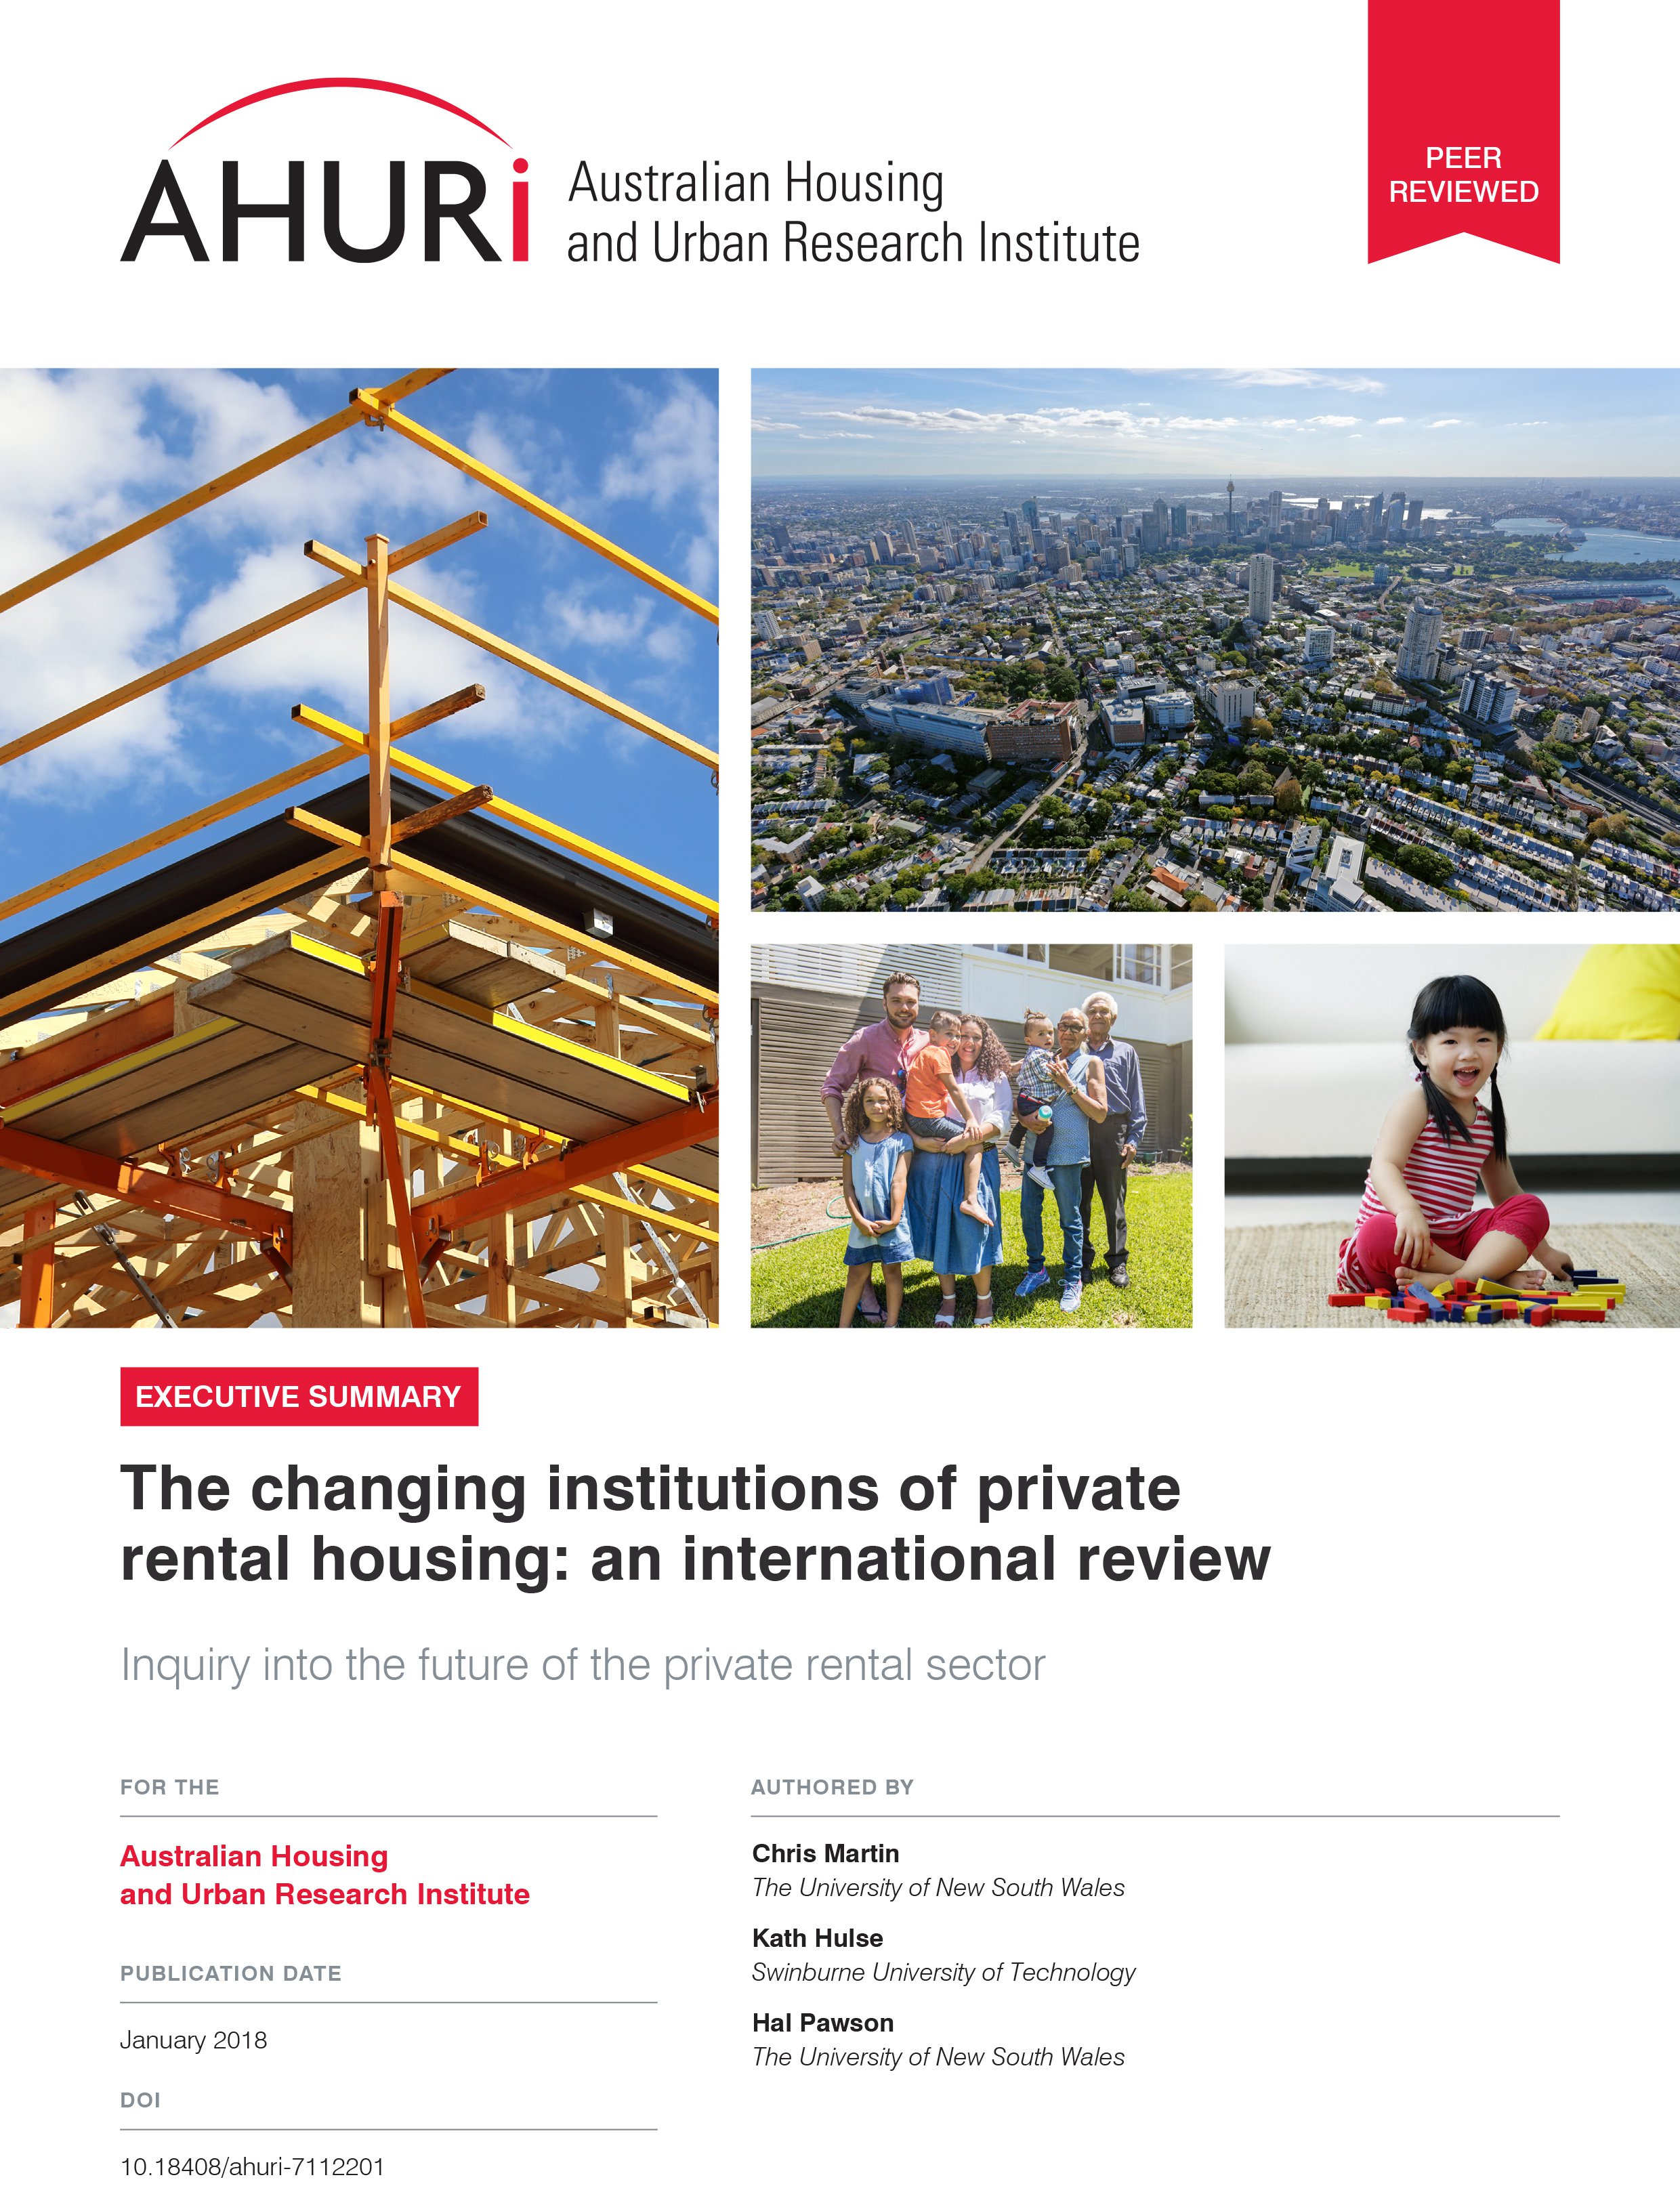 Executive Summary - The changing institutions of private rental housing: an international review